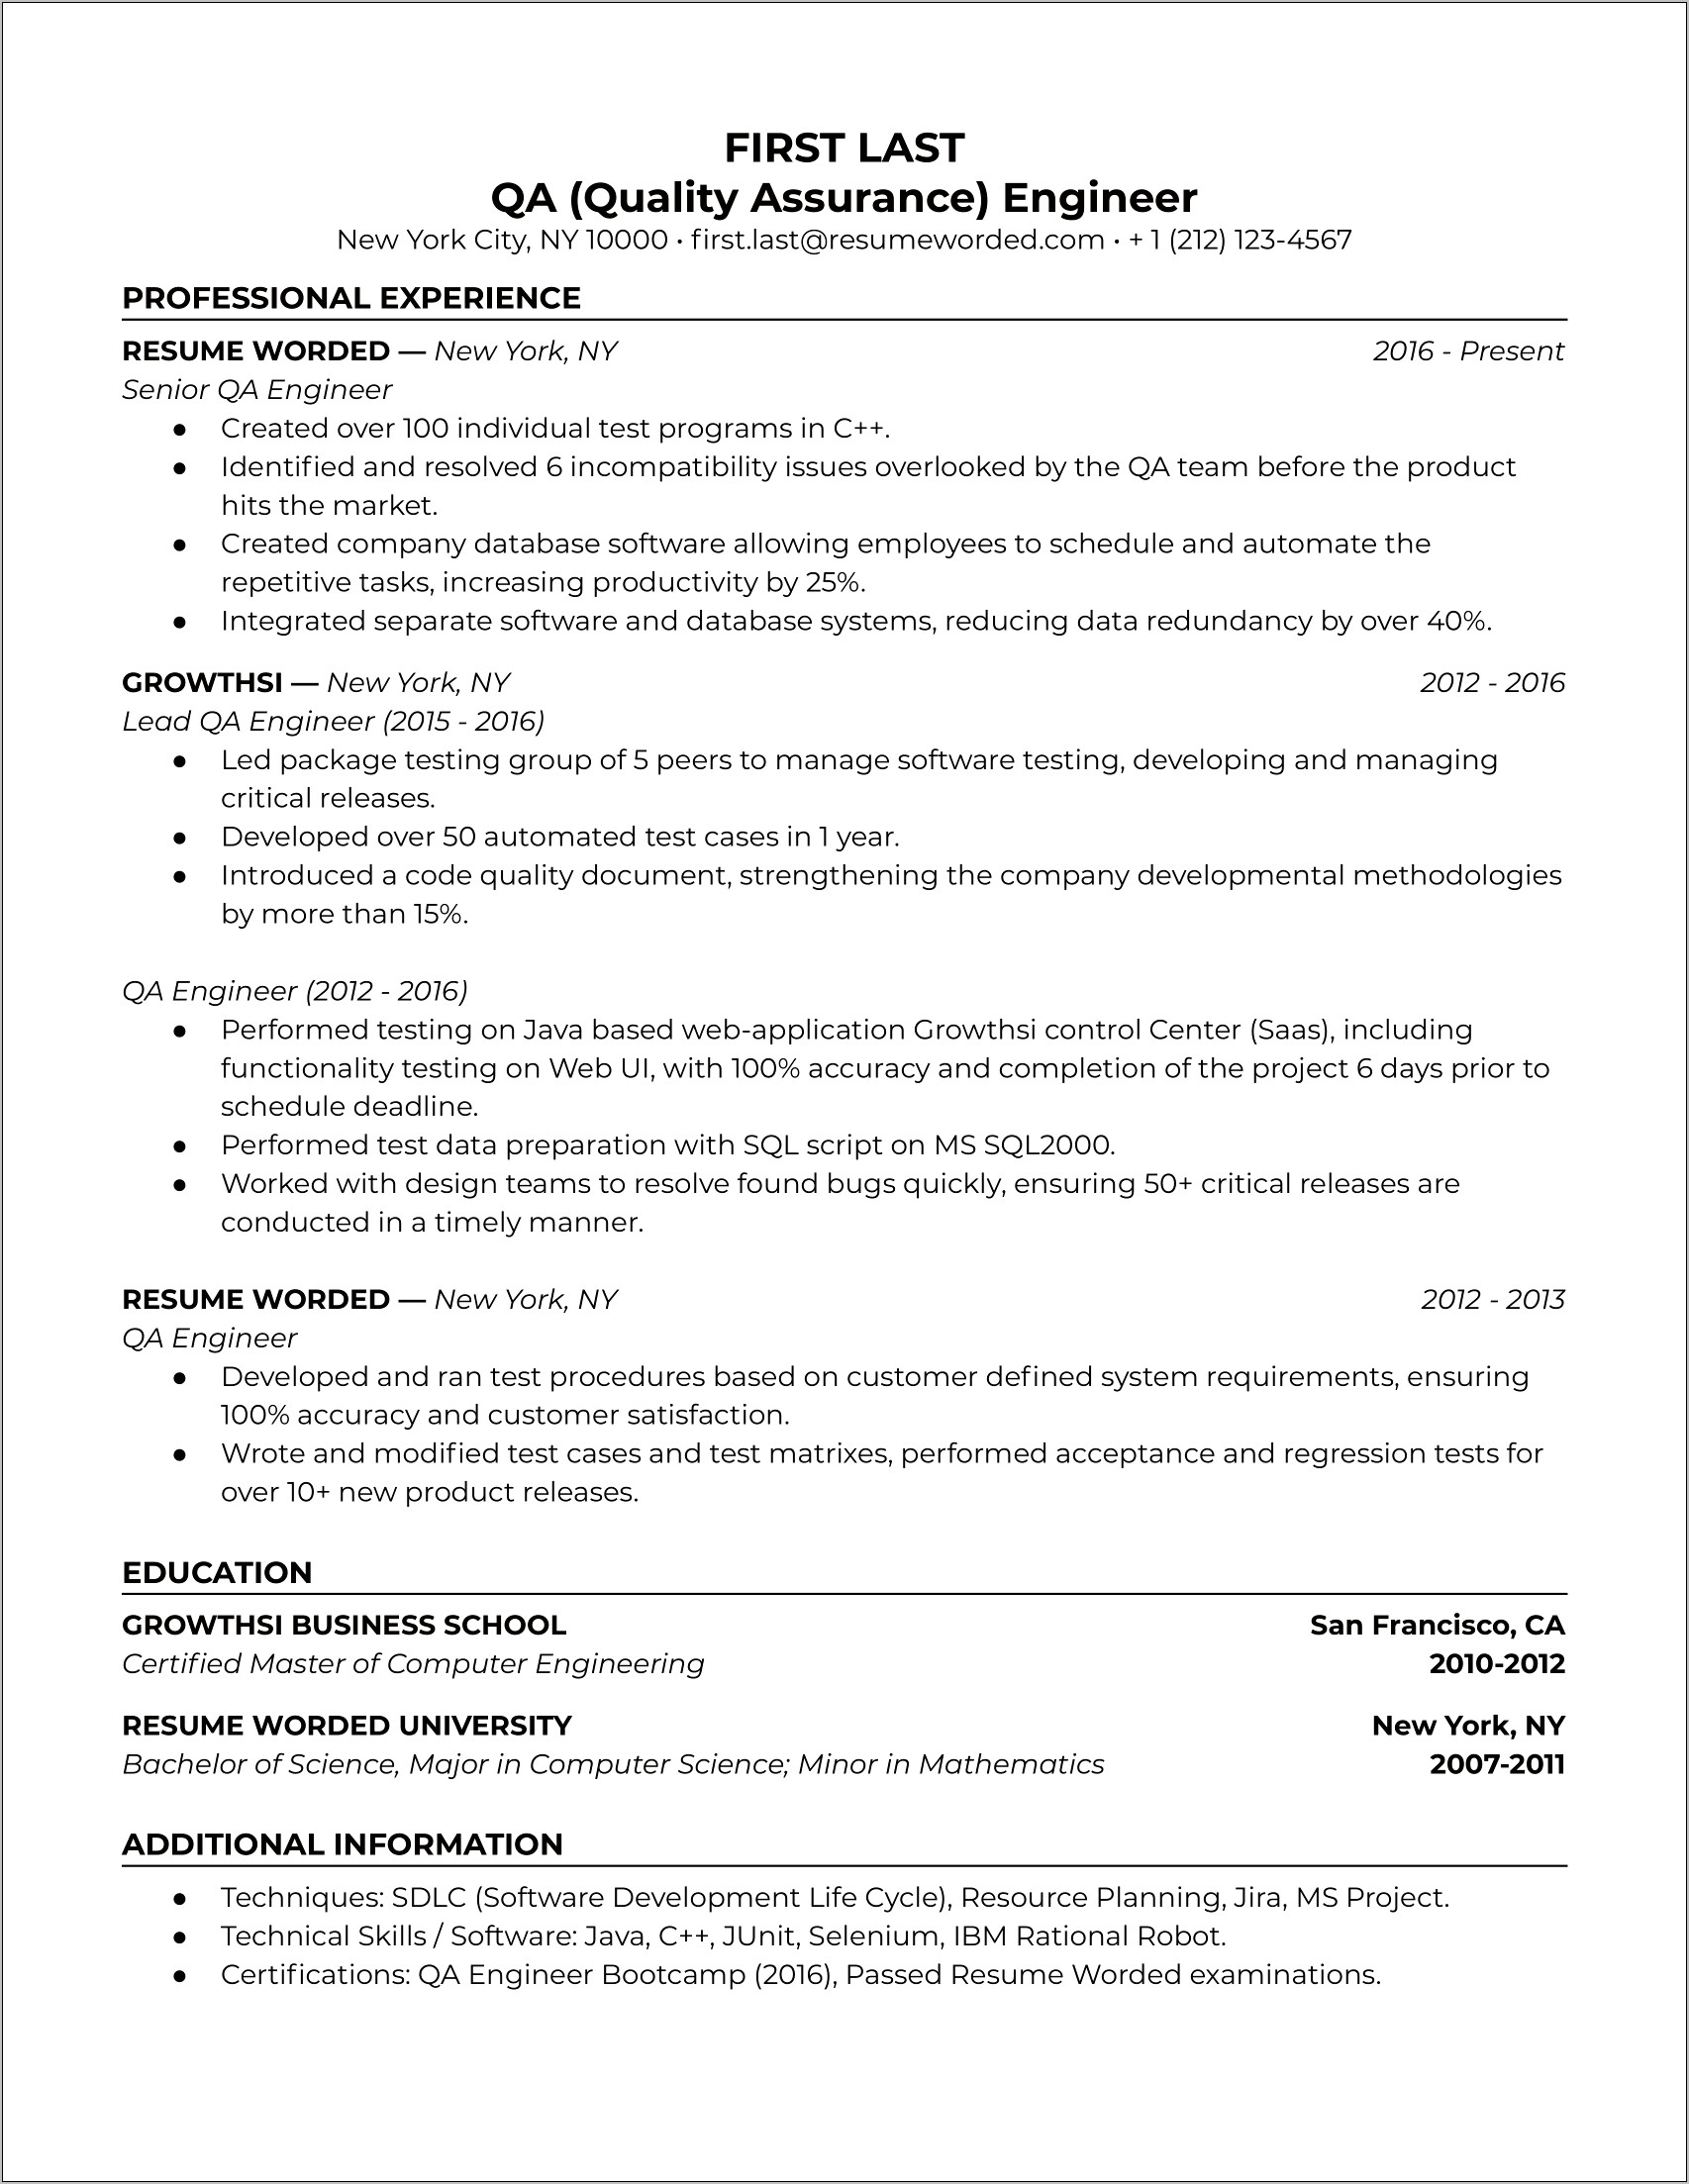 Quality Control Technician Resume Examples